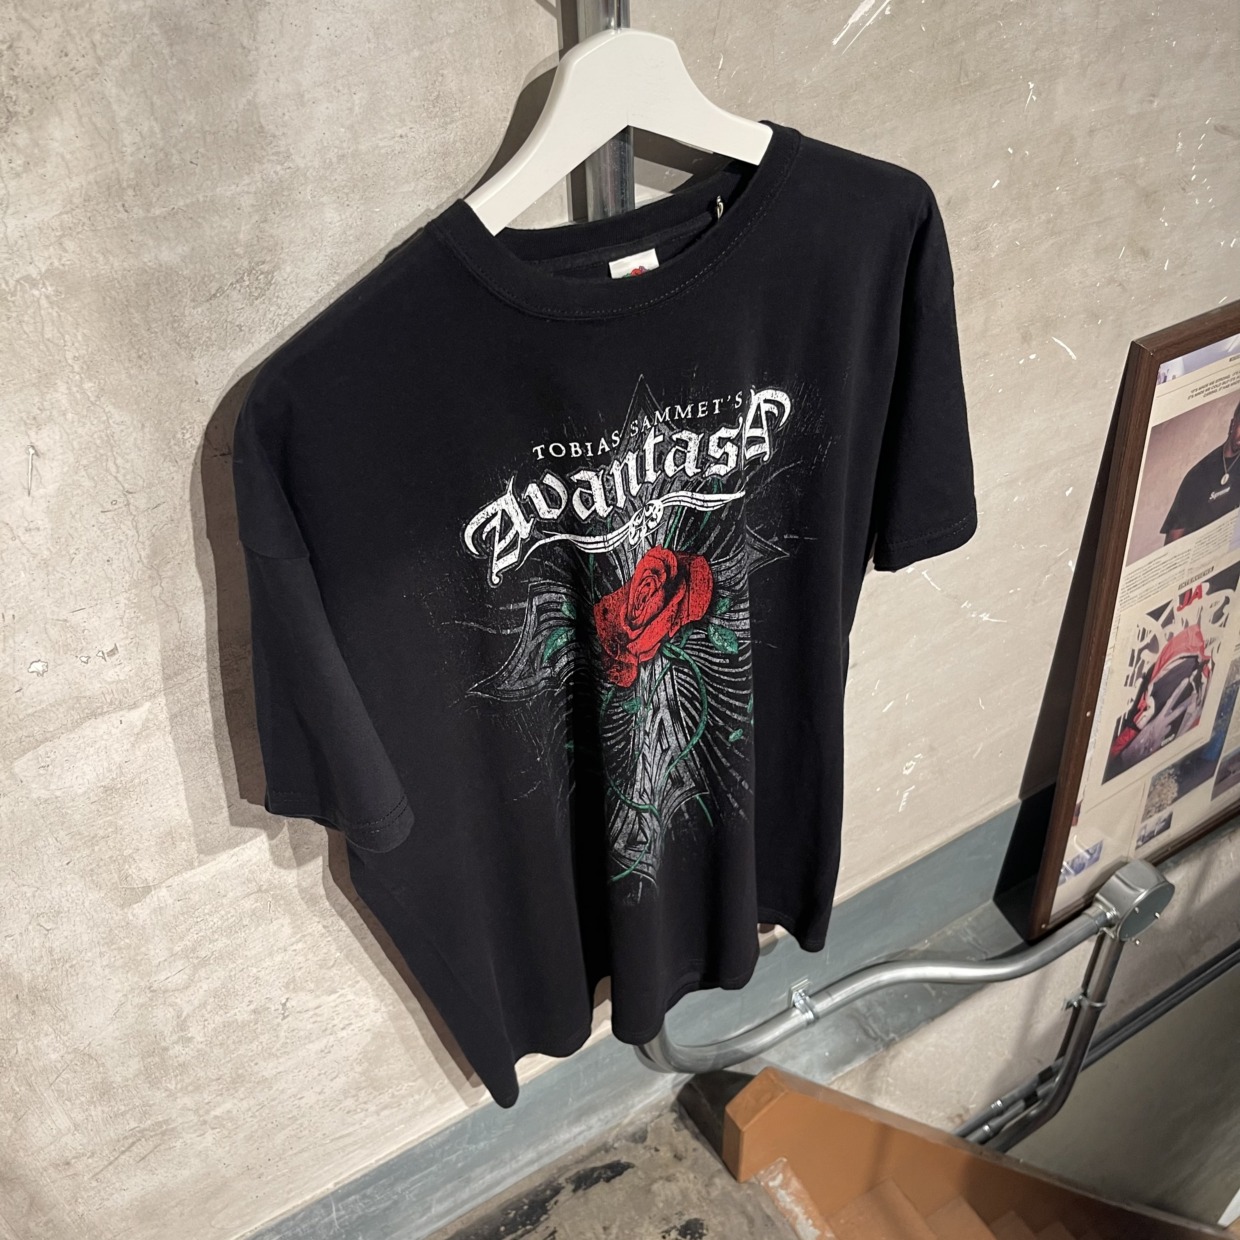 Band T-shirts “FRUIT OF THE LOOM®︎”